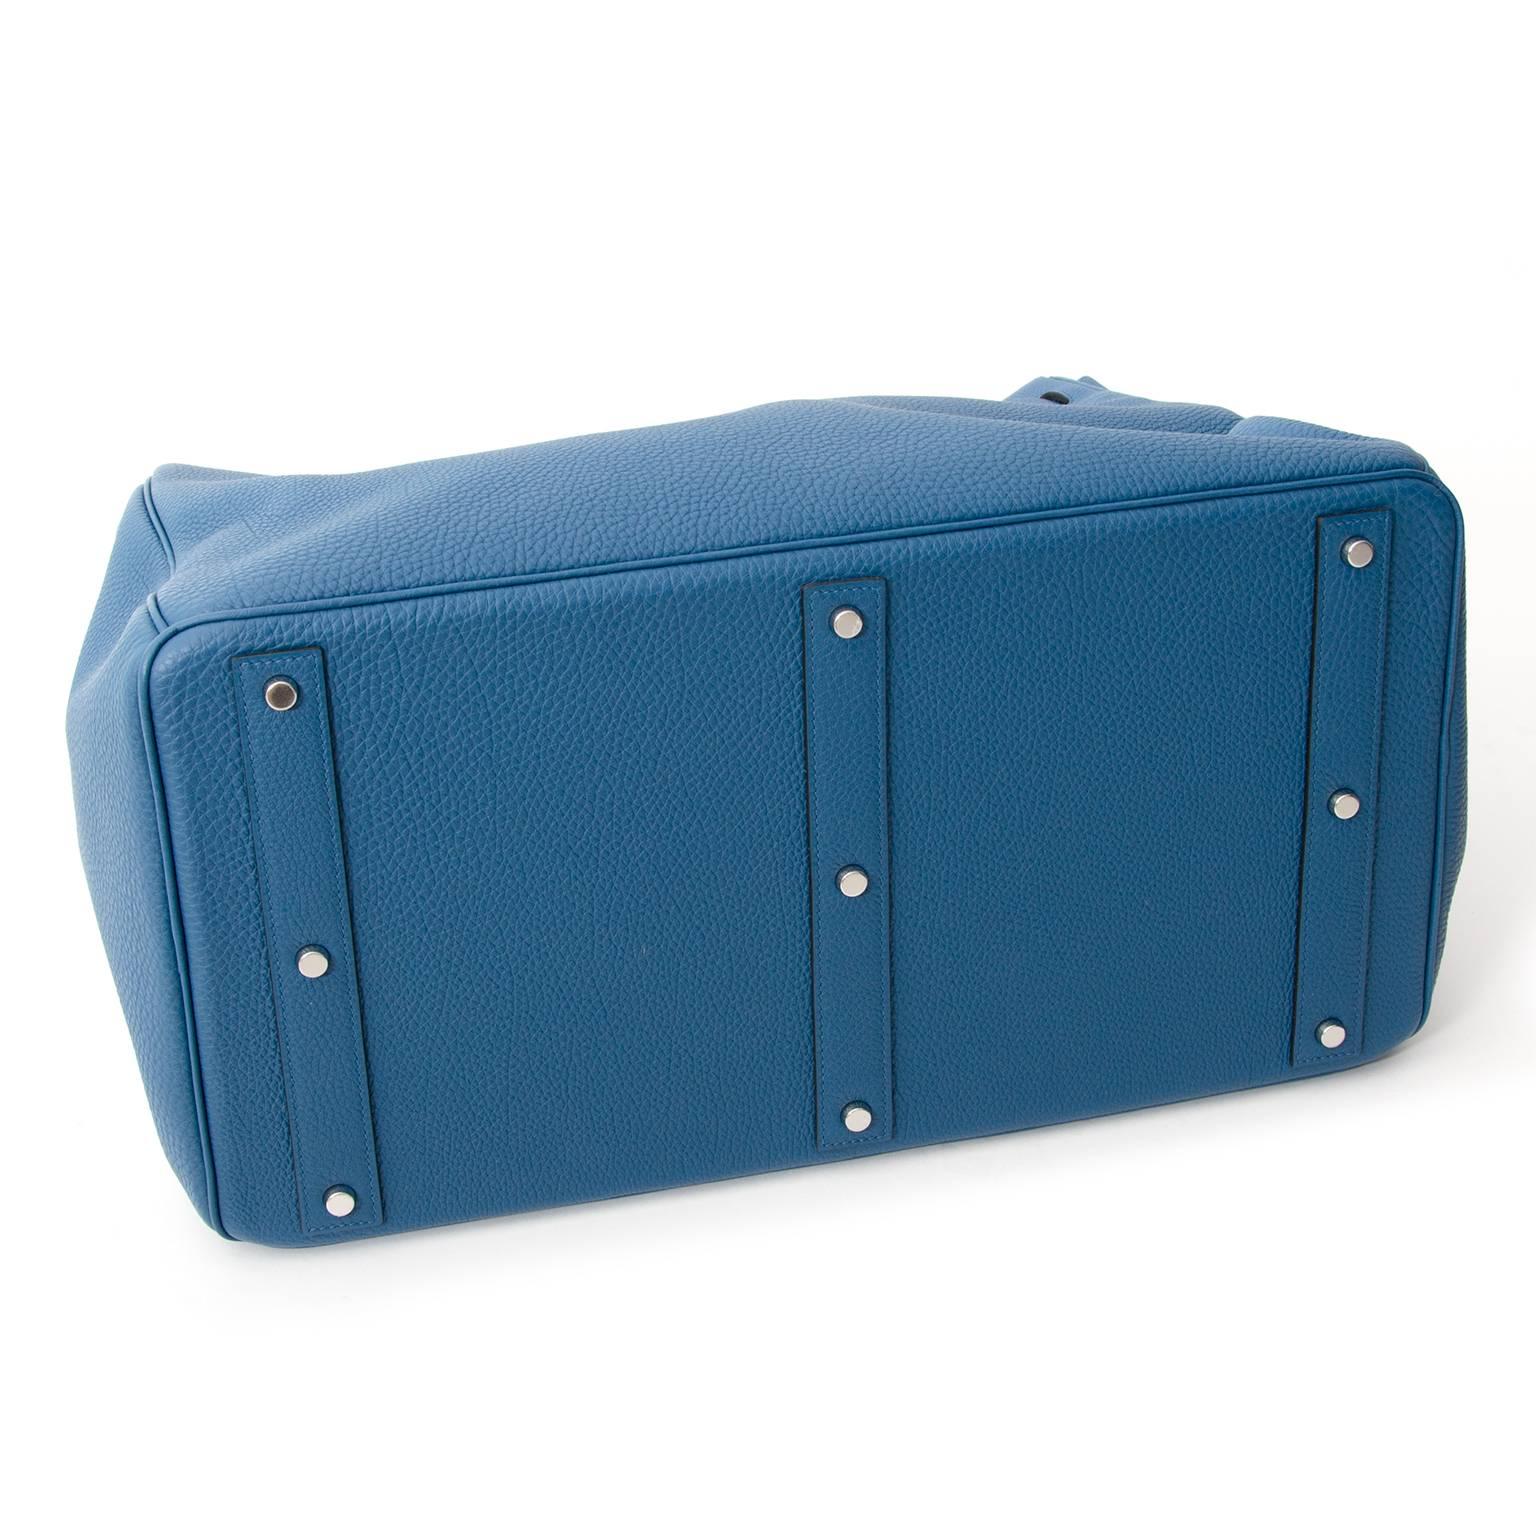 Hermès Bleu de Galice 50 cm Haut a Courroies store fresh with the protective plastic intact on the hardware. Considered the ultimate in luxury for both men and women, the handcrafted HAC is extremely rare, especially in this size 50 and color